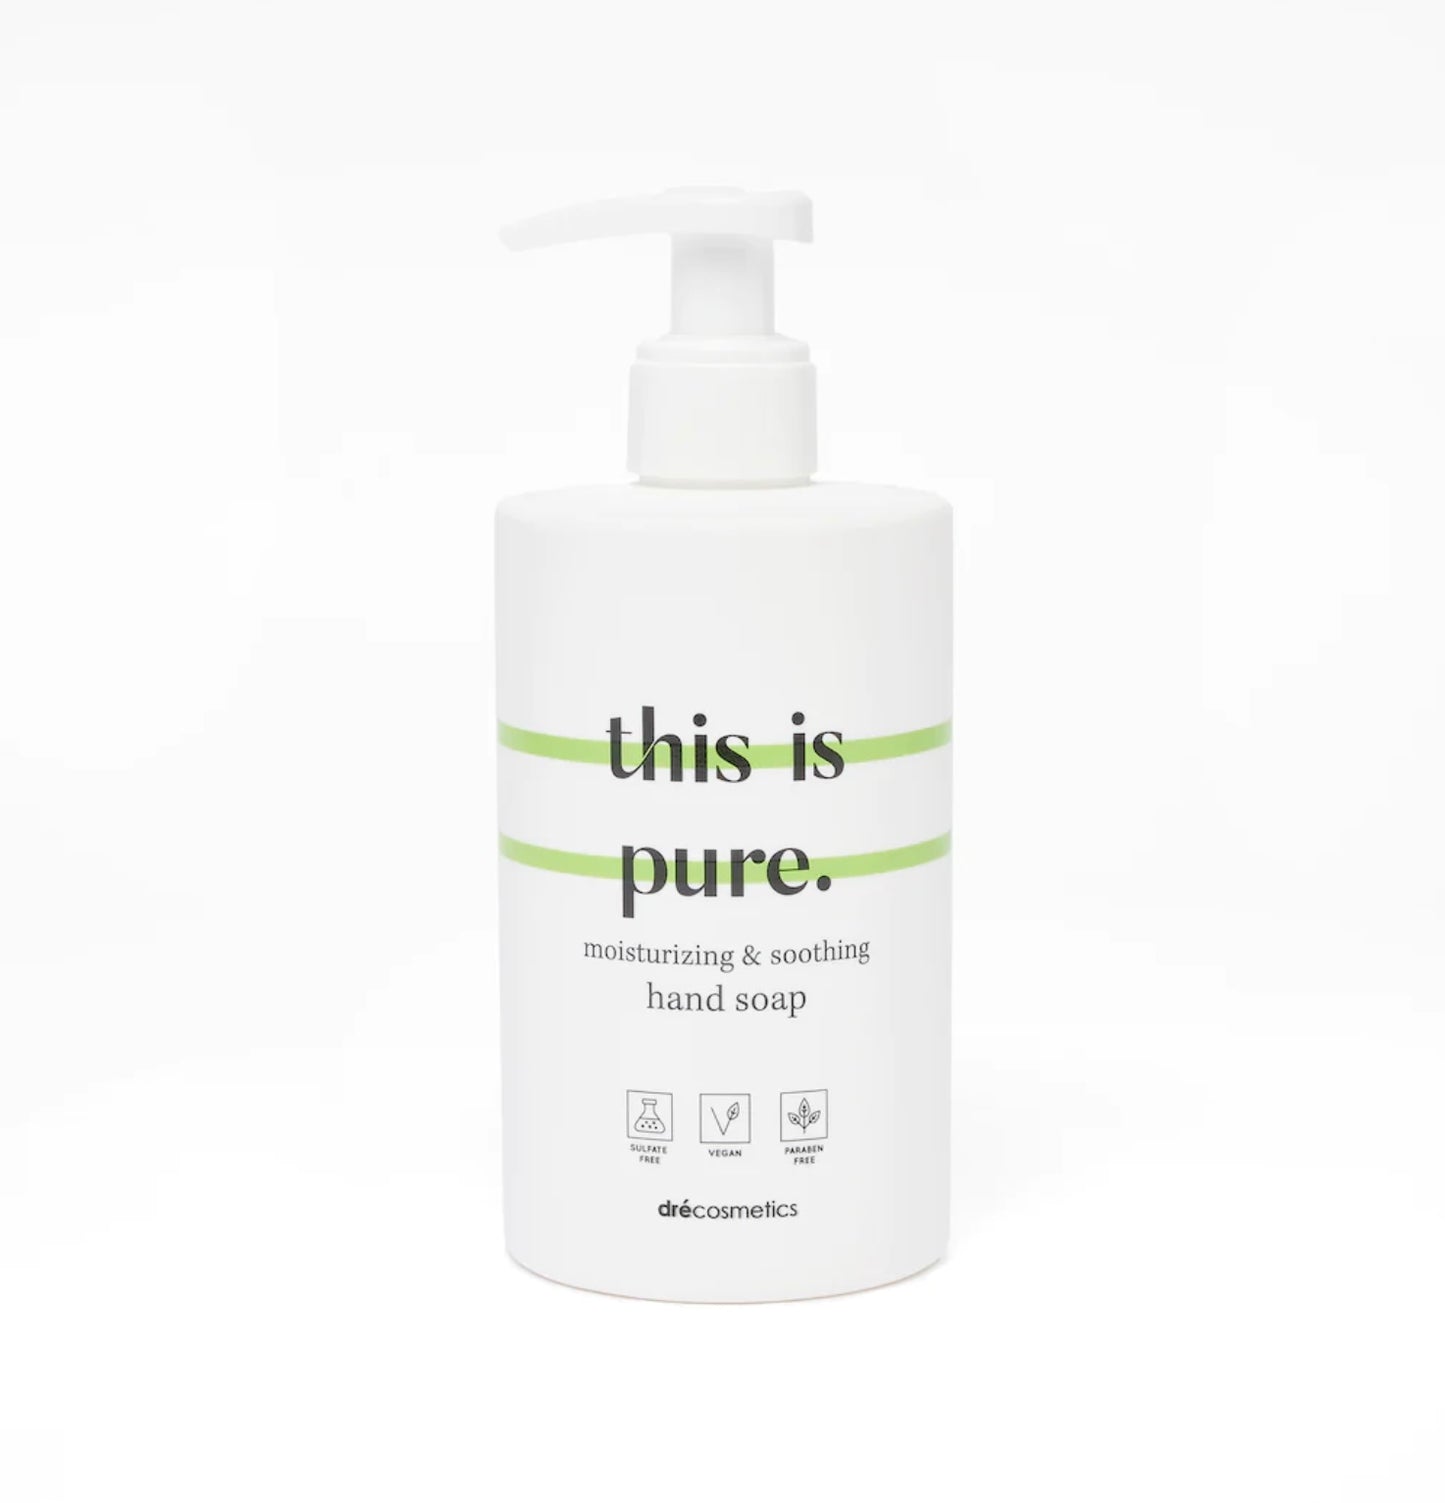 Hand Soap "this is pure."